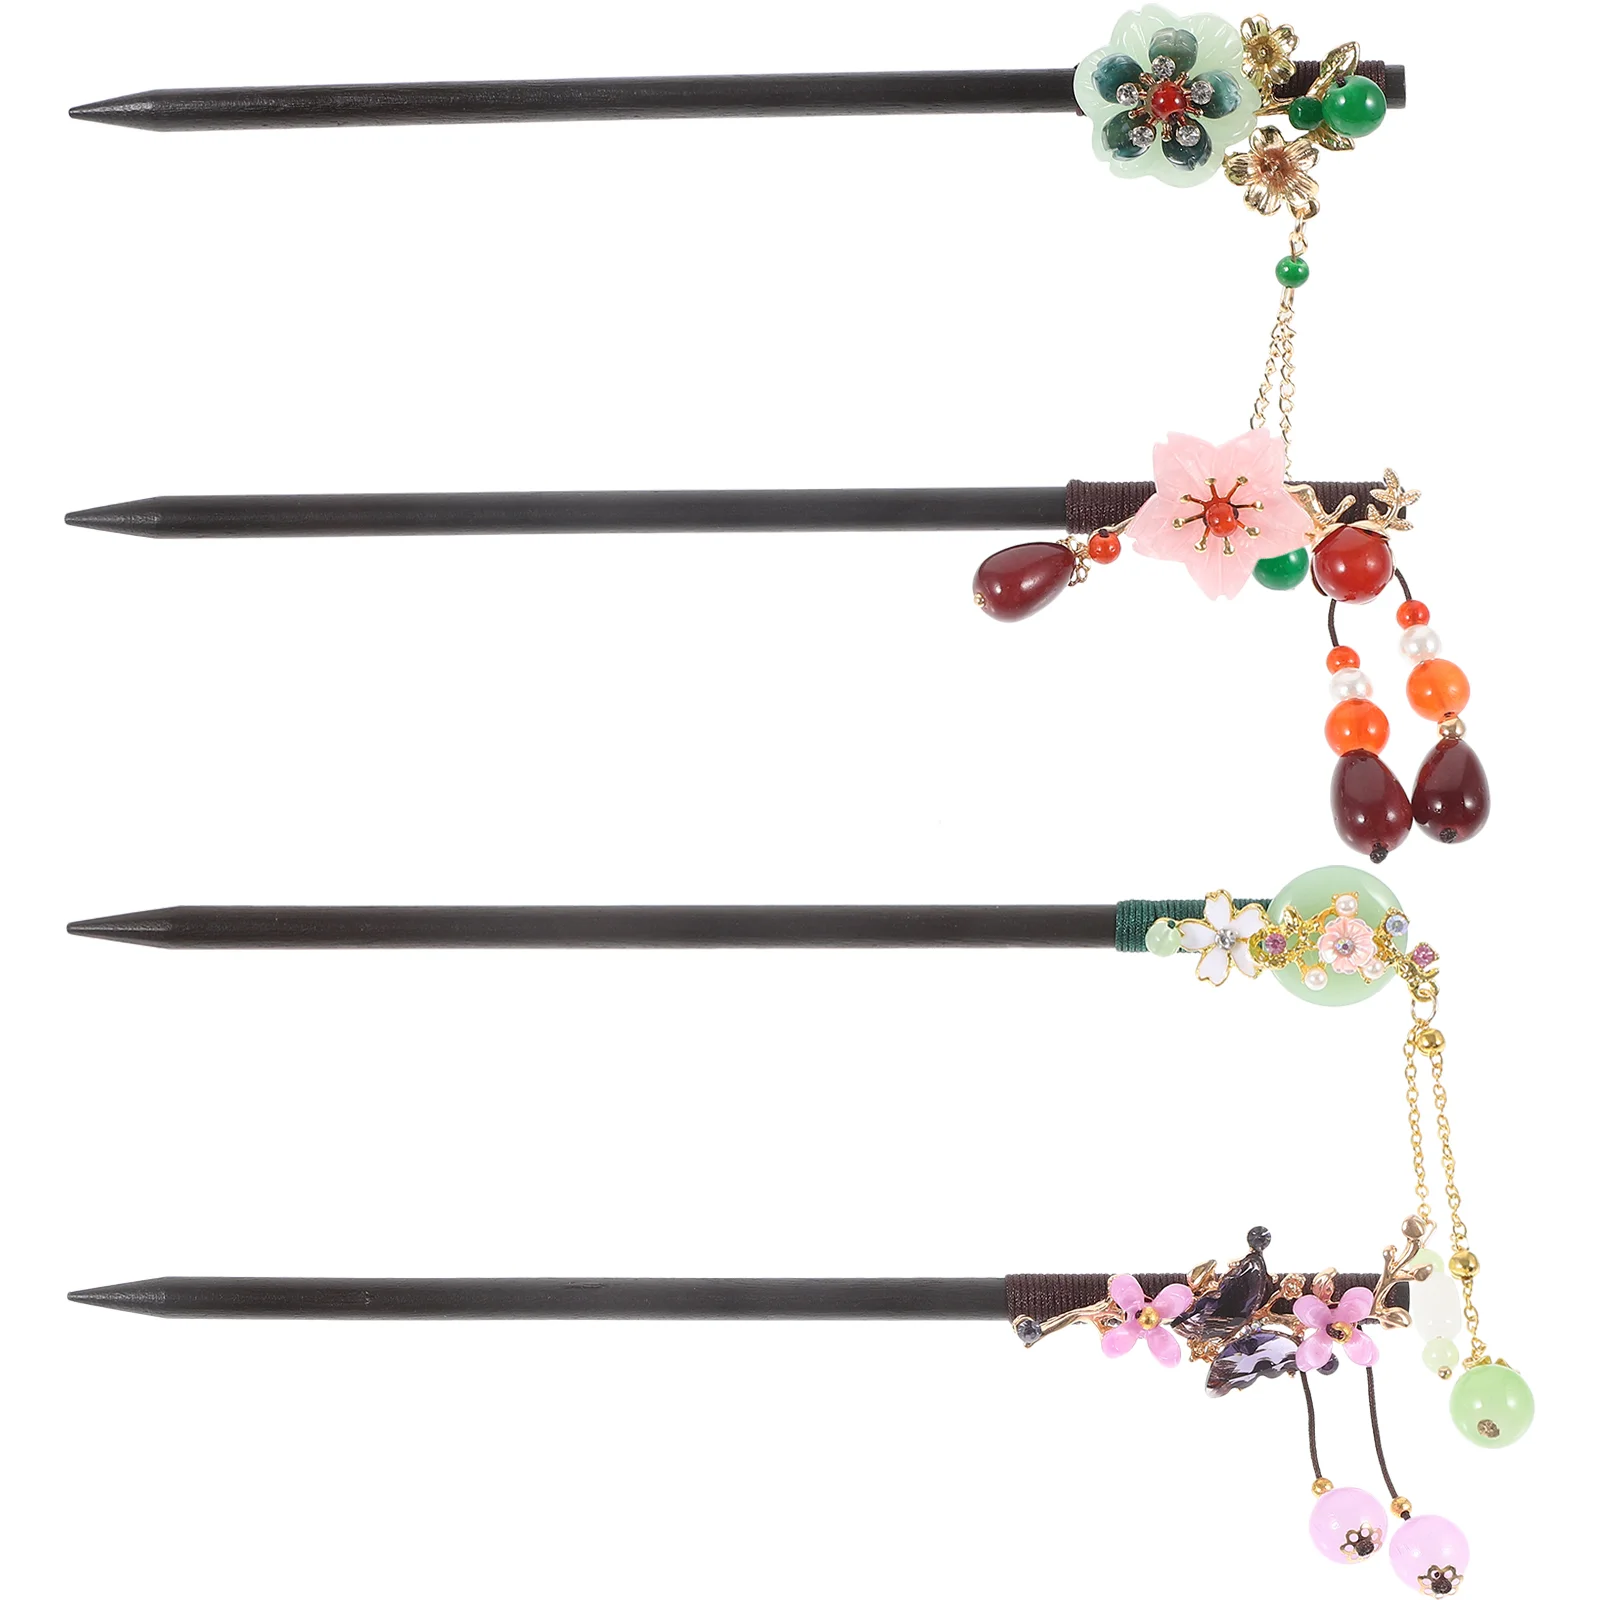 4pcs Wooden Hairpins Style Headdress Hairpin Hair Jewelry liglamo large size jewelry display stand wooden multiple easel showcase display holder for necklace colors